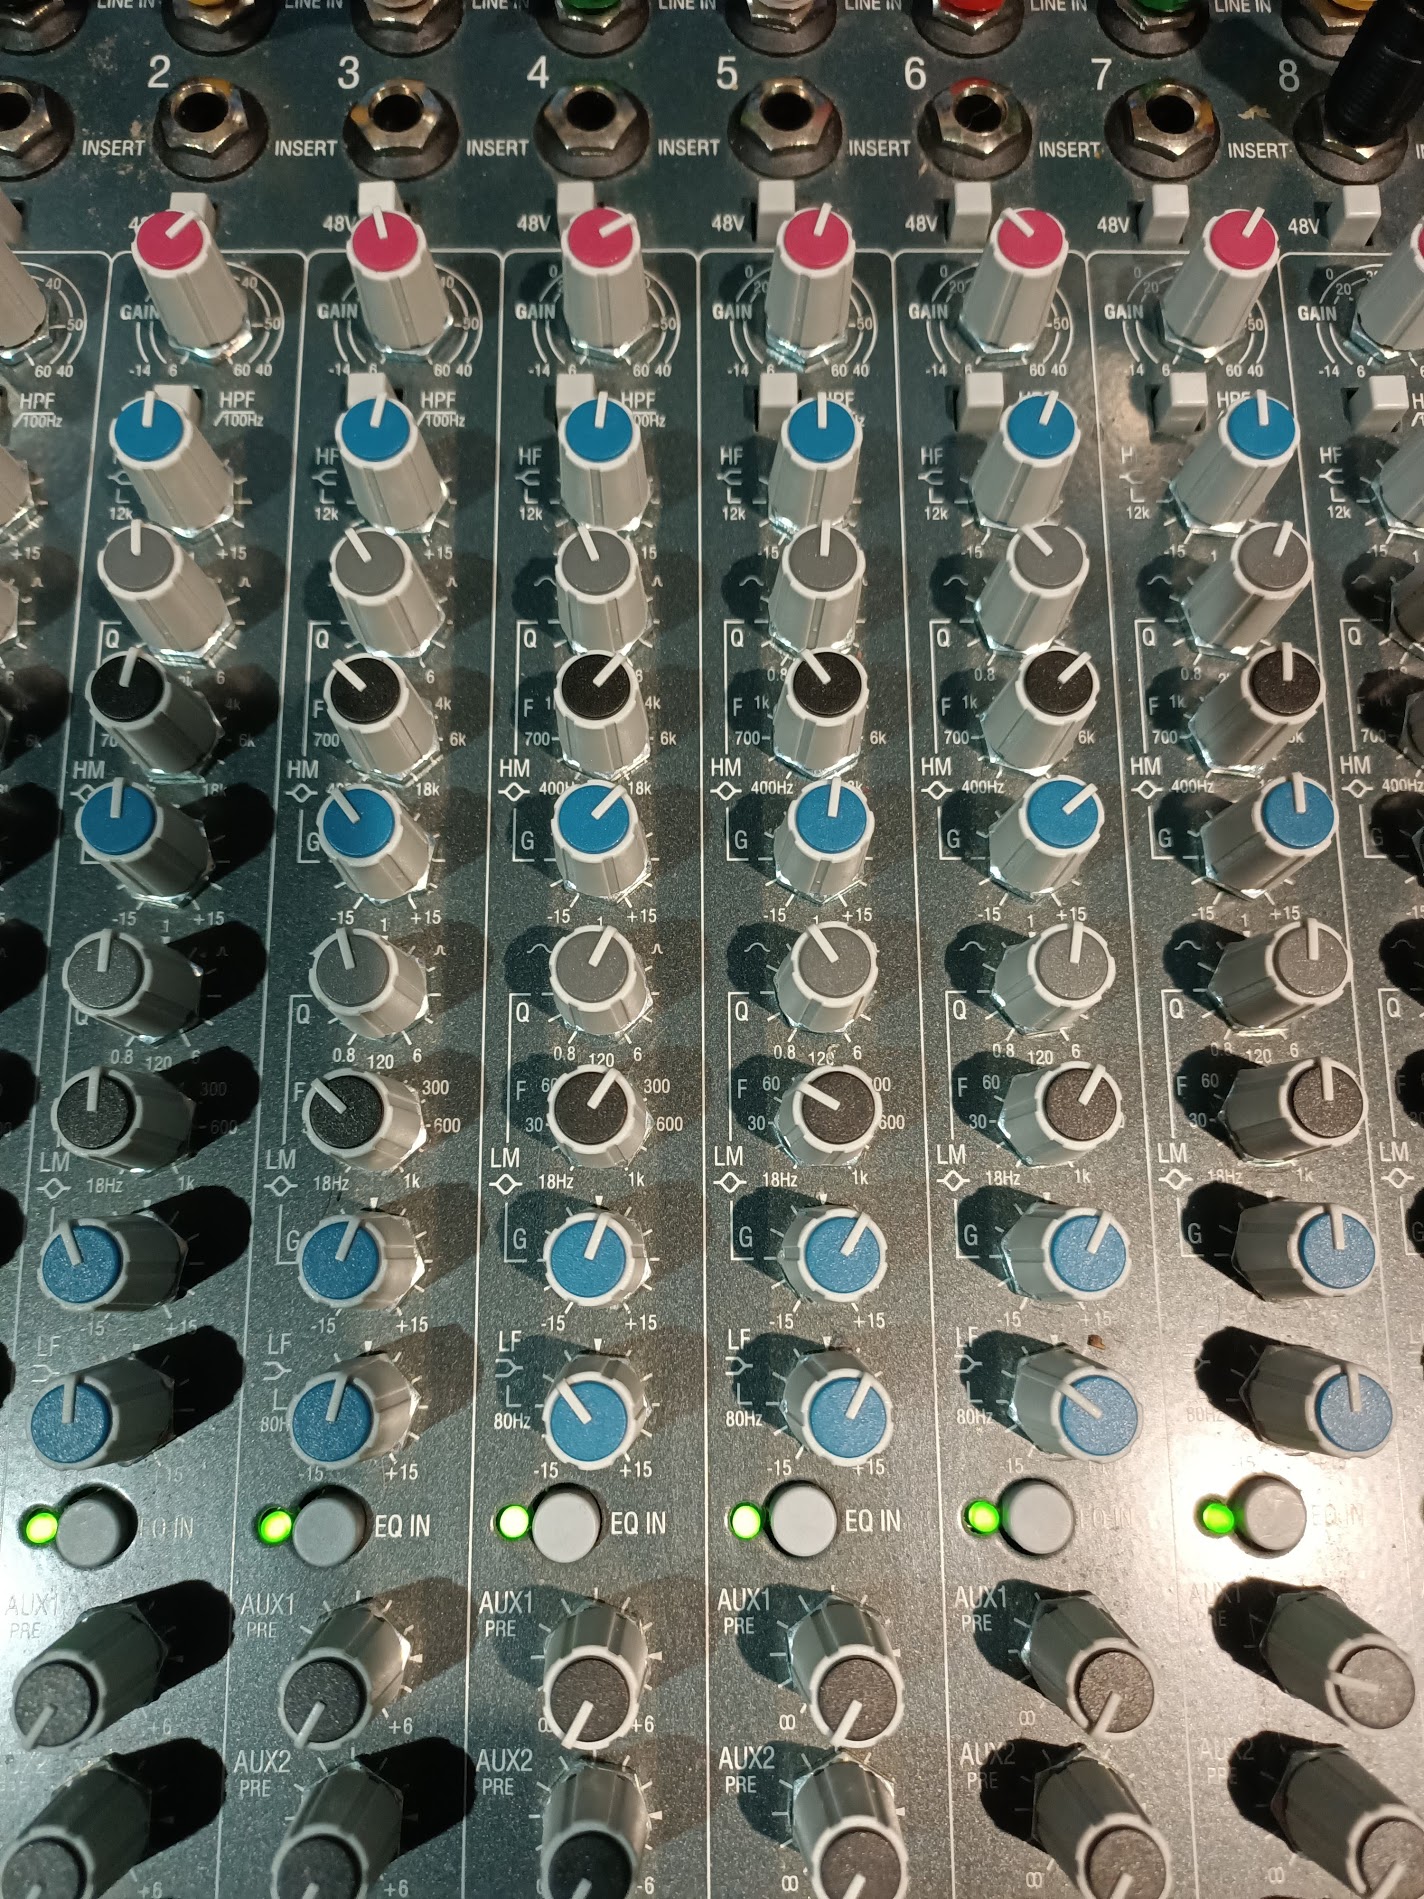 Steam Mastering - mixer panel showing EQ